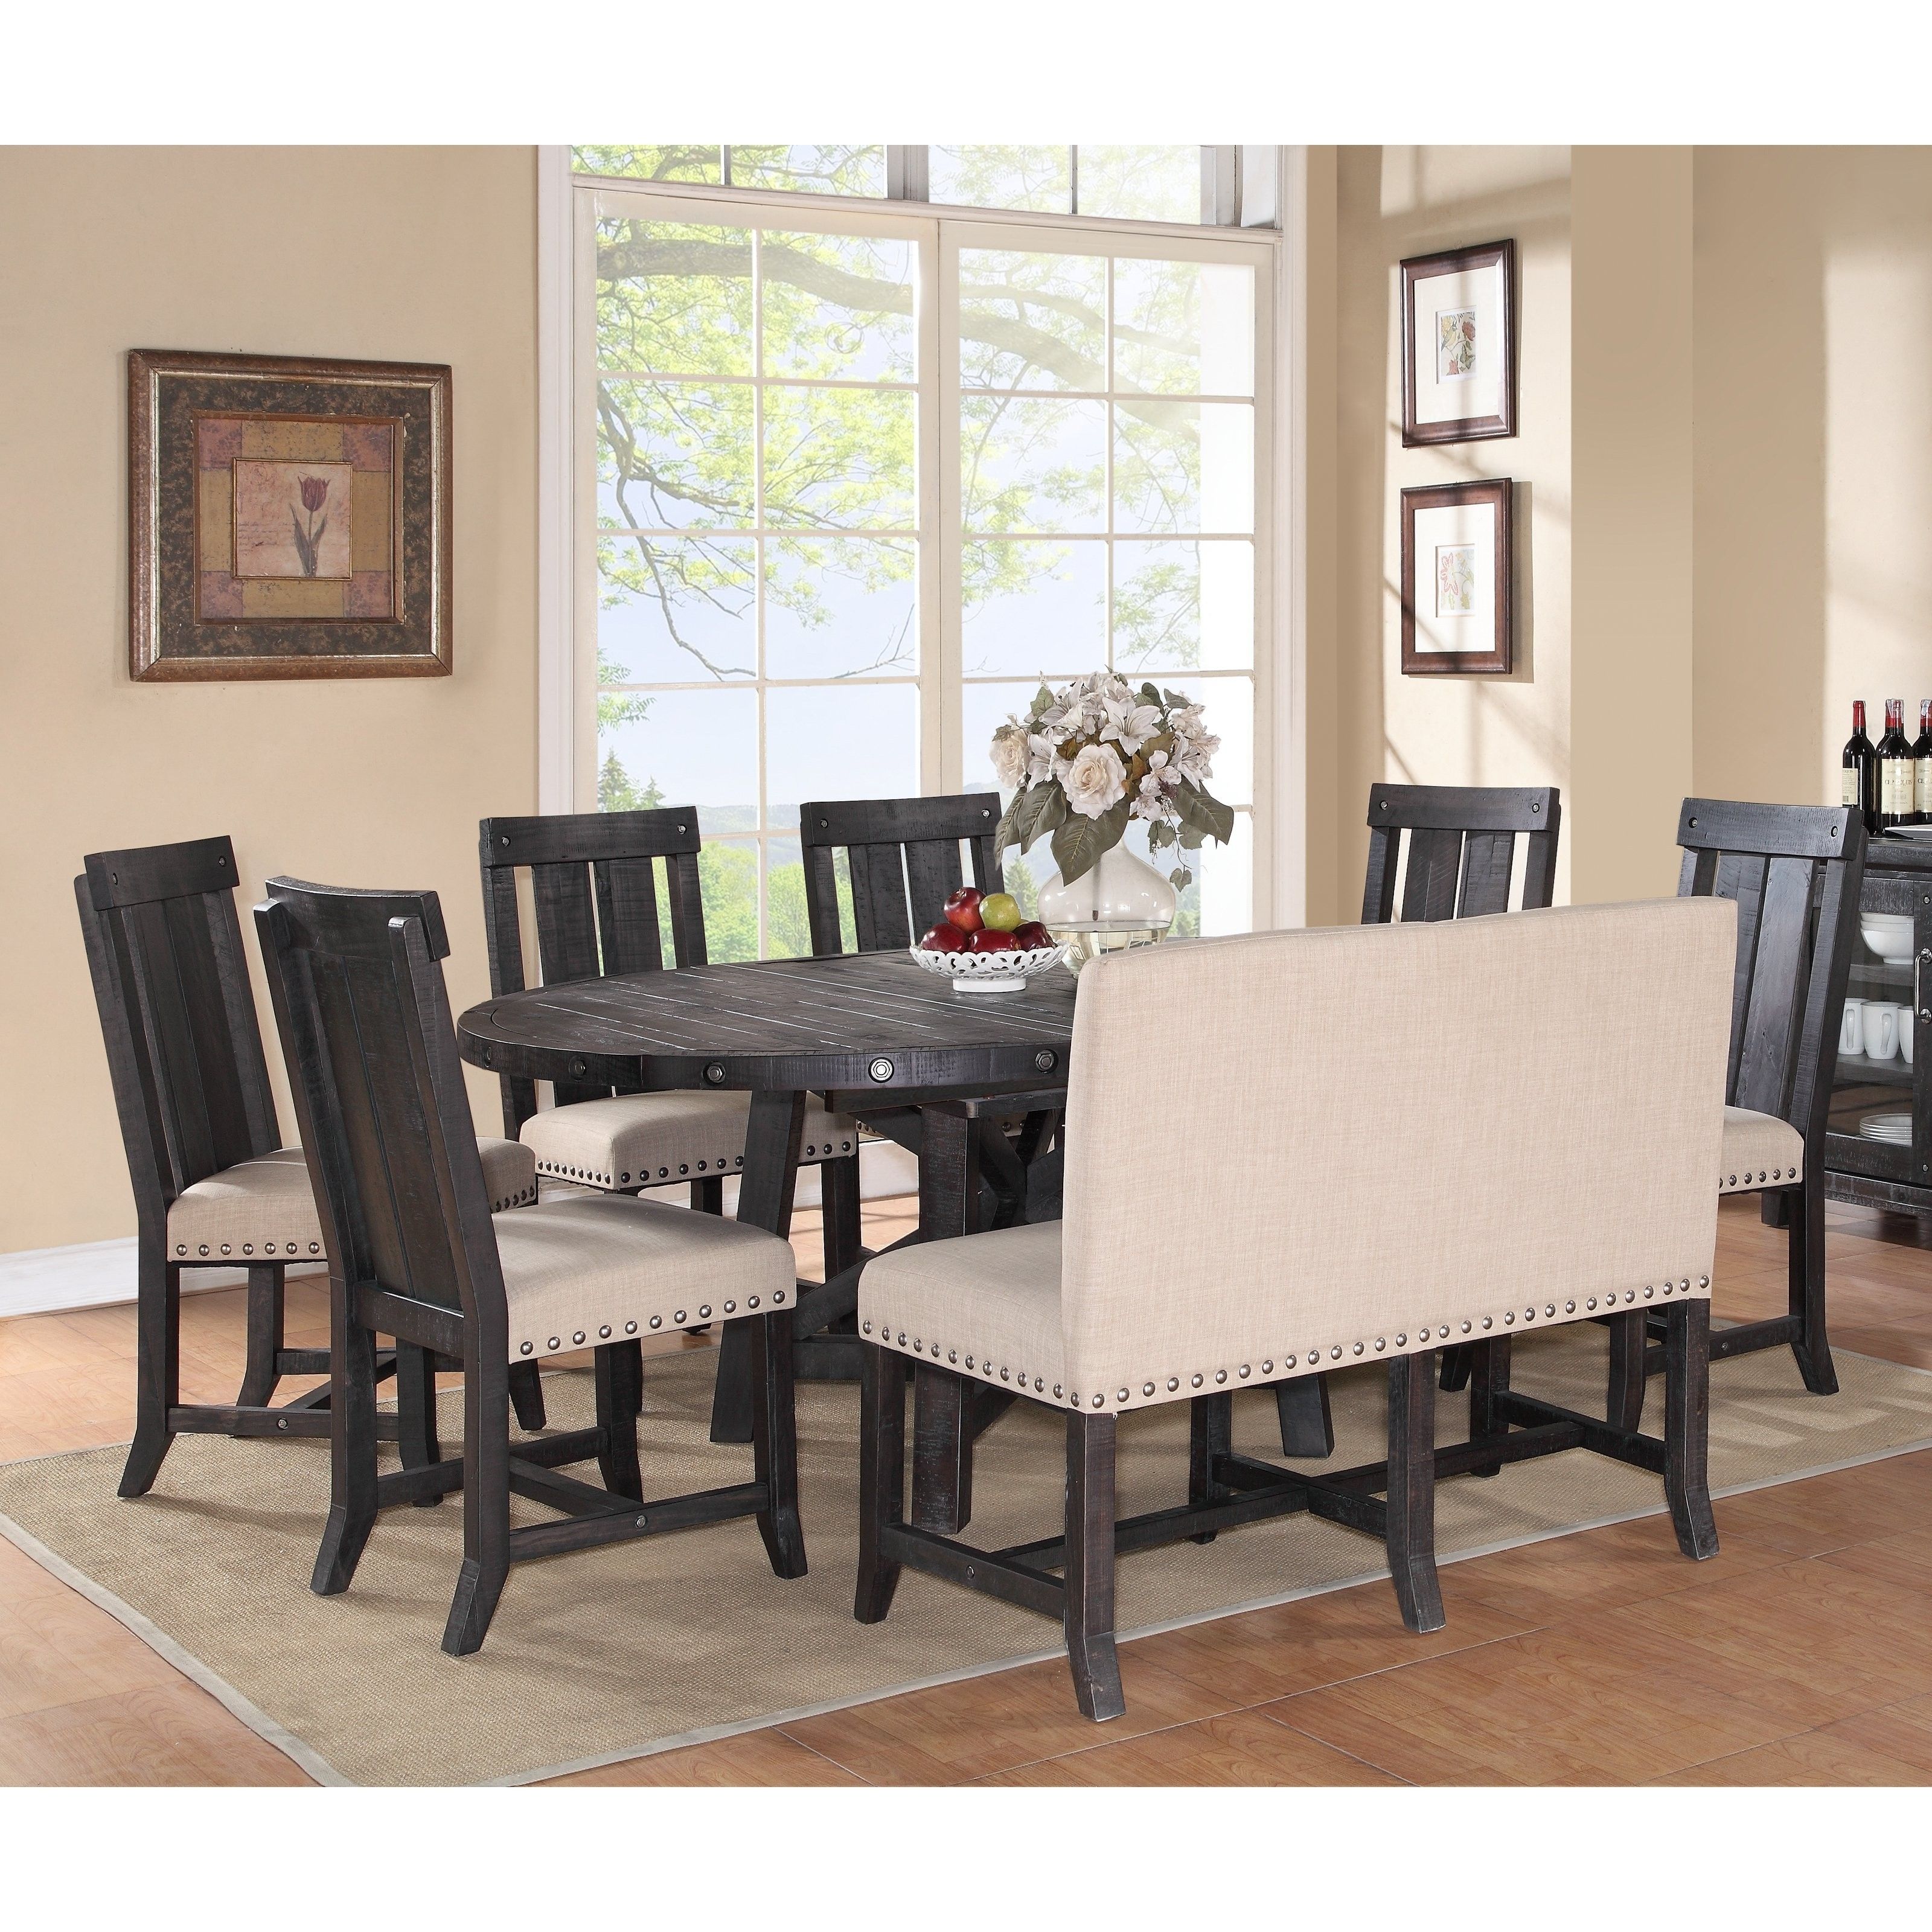 Coffee Table Dinner Table Best Of Amazon Emerald Home T100 0 Pertaining To Most Popular Chandler 7 Piece Extension Dining Sets With Fabric Side Chairs (View 18 of 20)